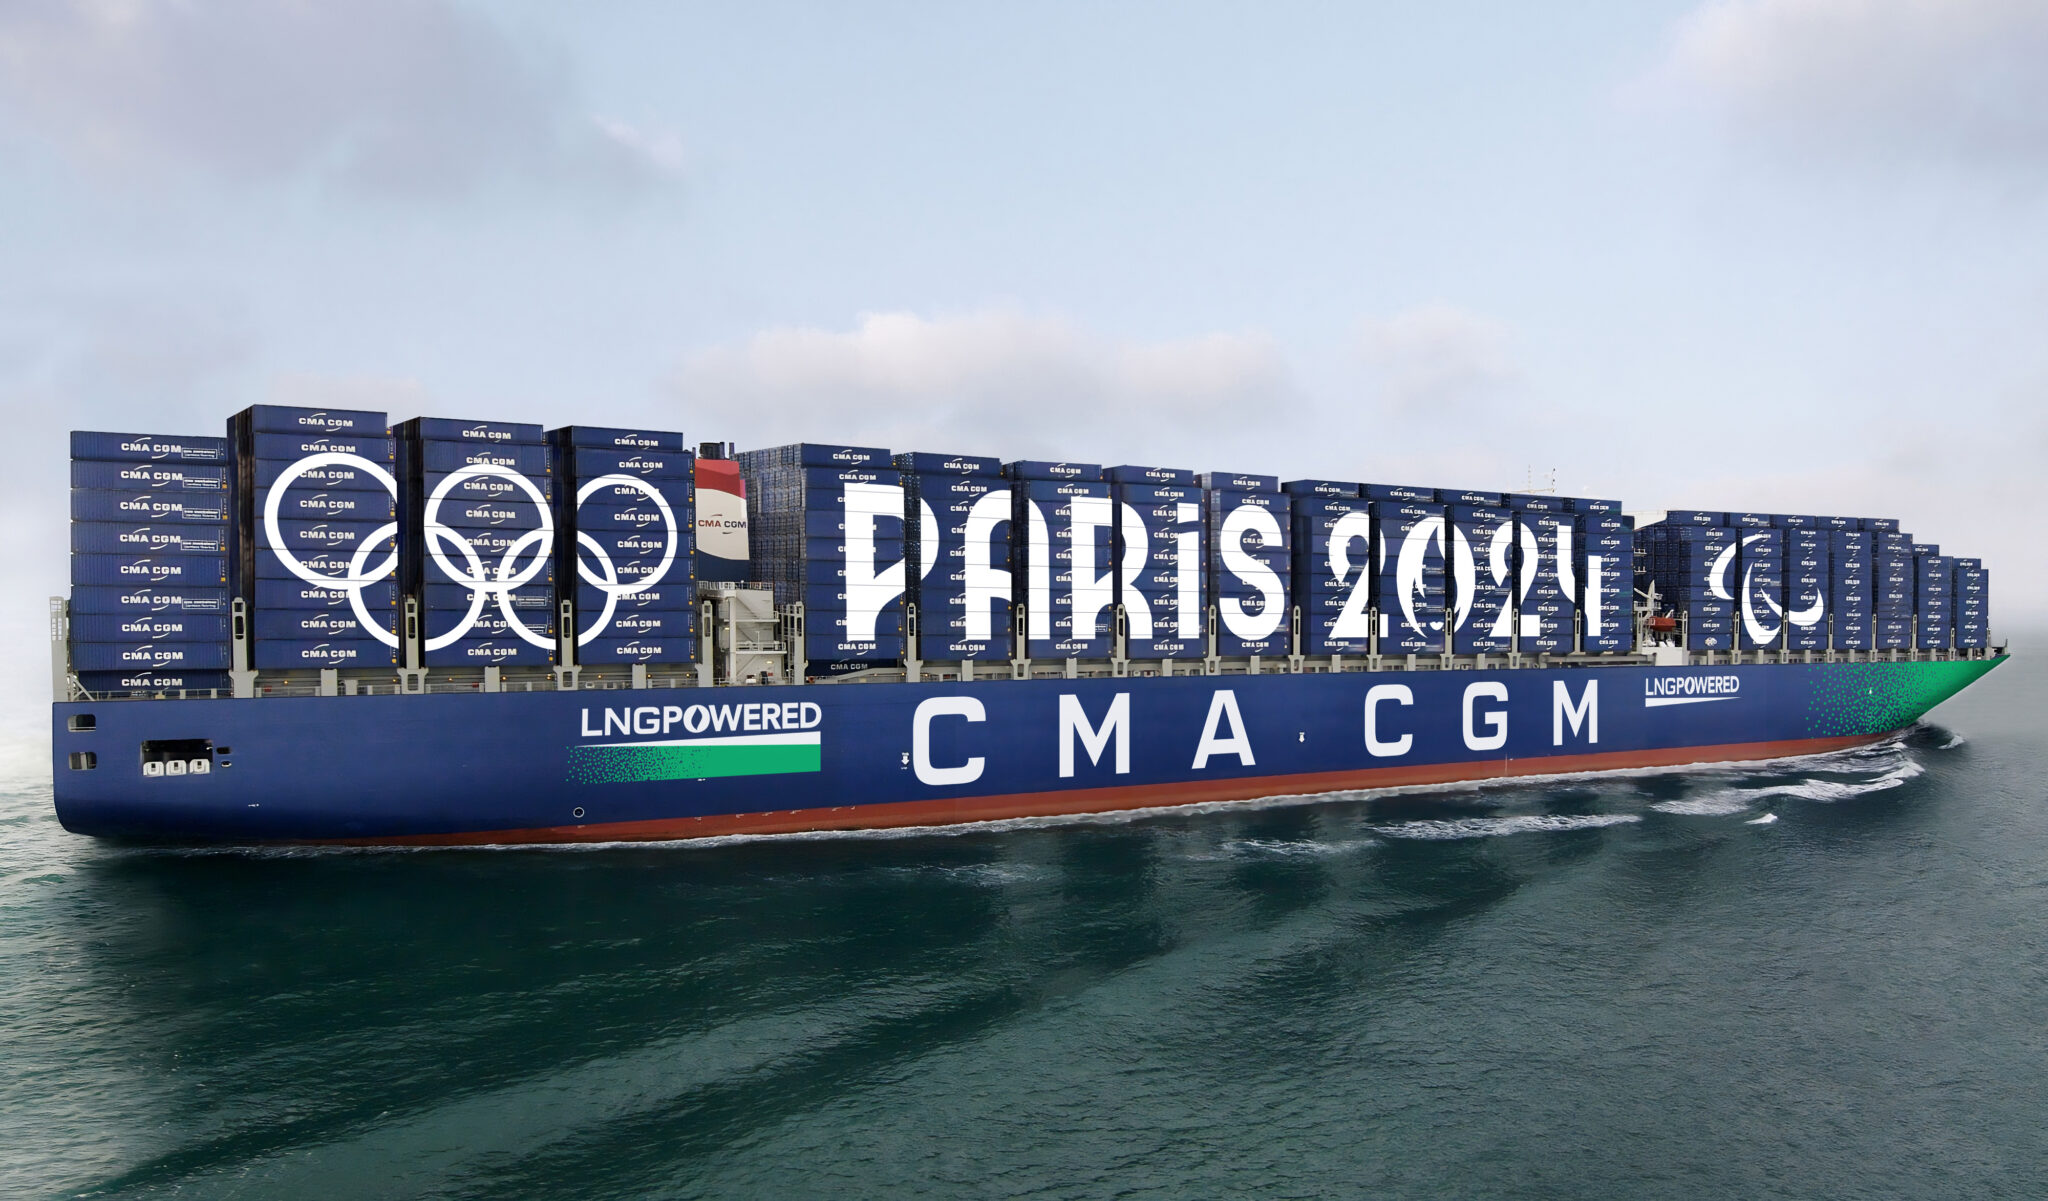 container-ship-in-marseille-welcomes-olympic-flame